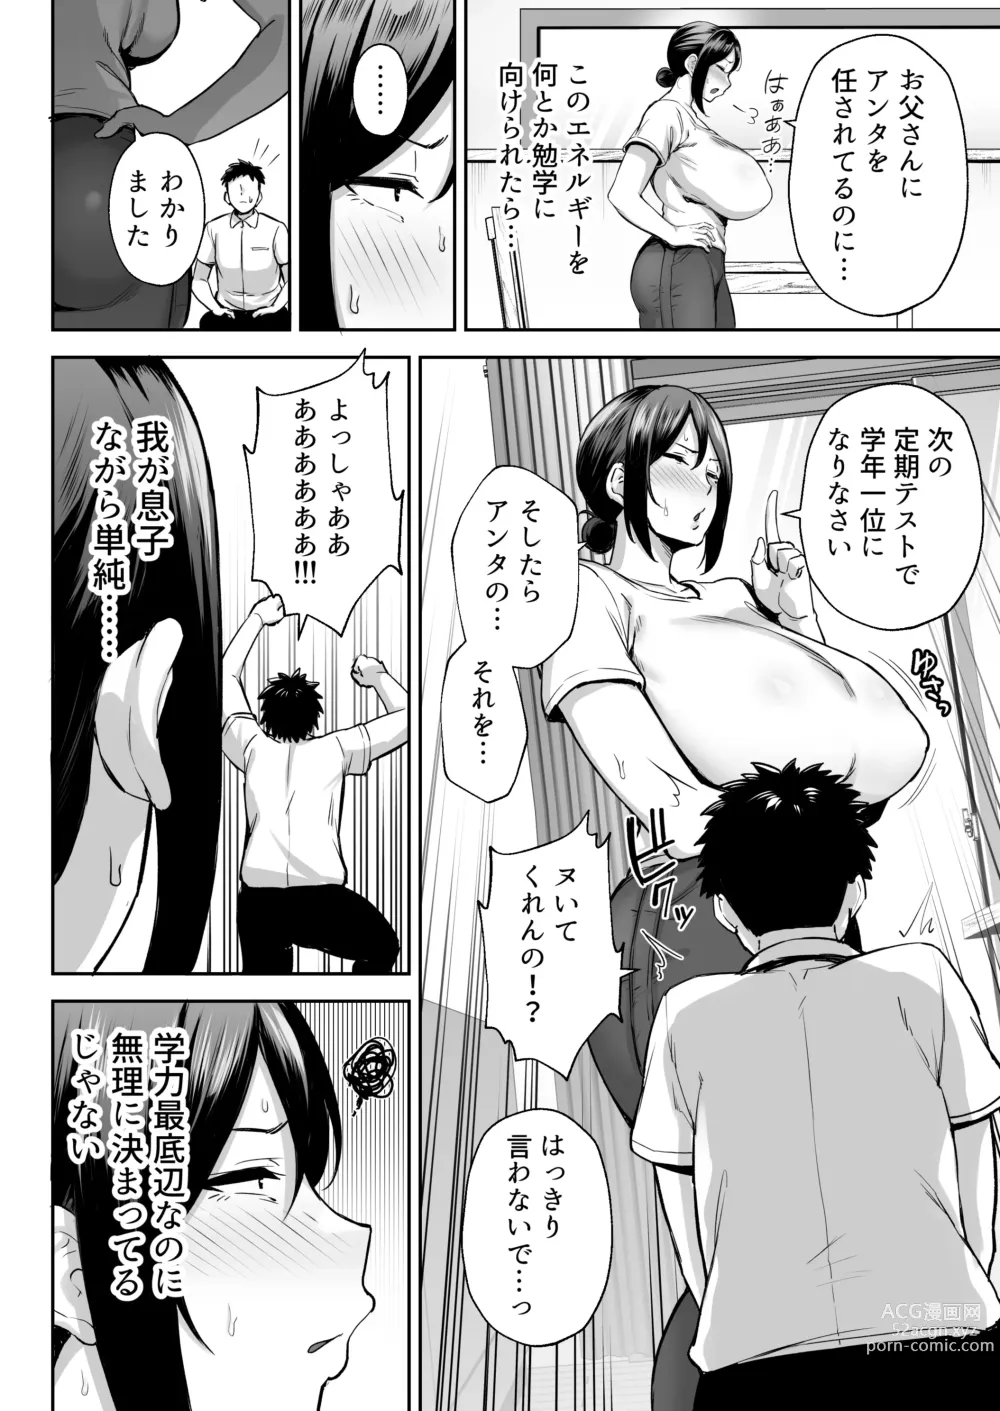 Page 7 of doujinshi The most intimate and erotic female Miyuki - Im a mother, but I'm having trouble with my monkey son